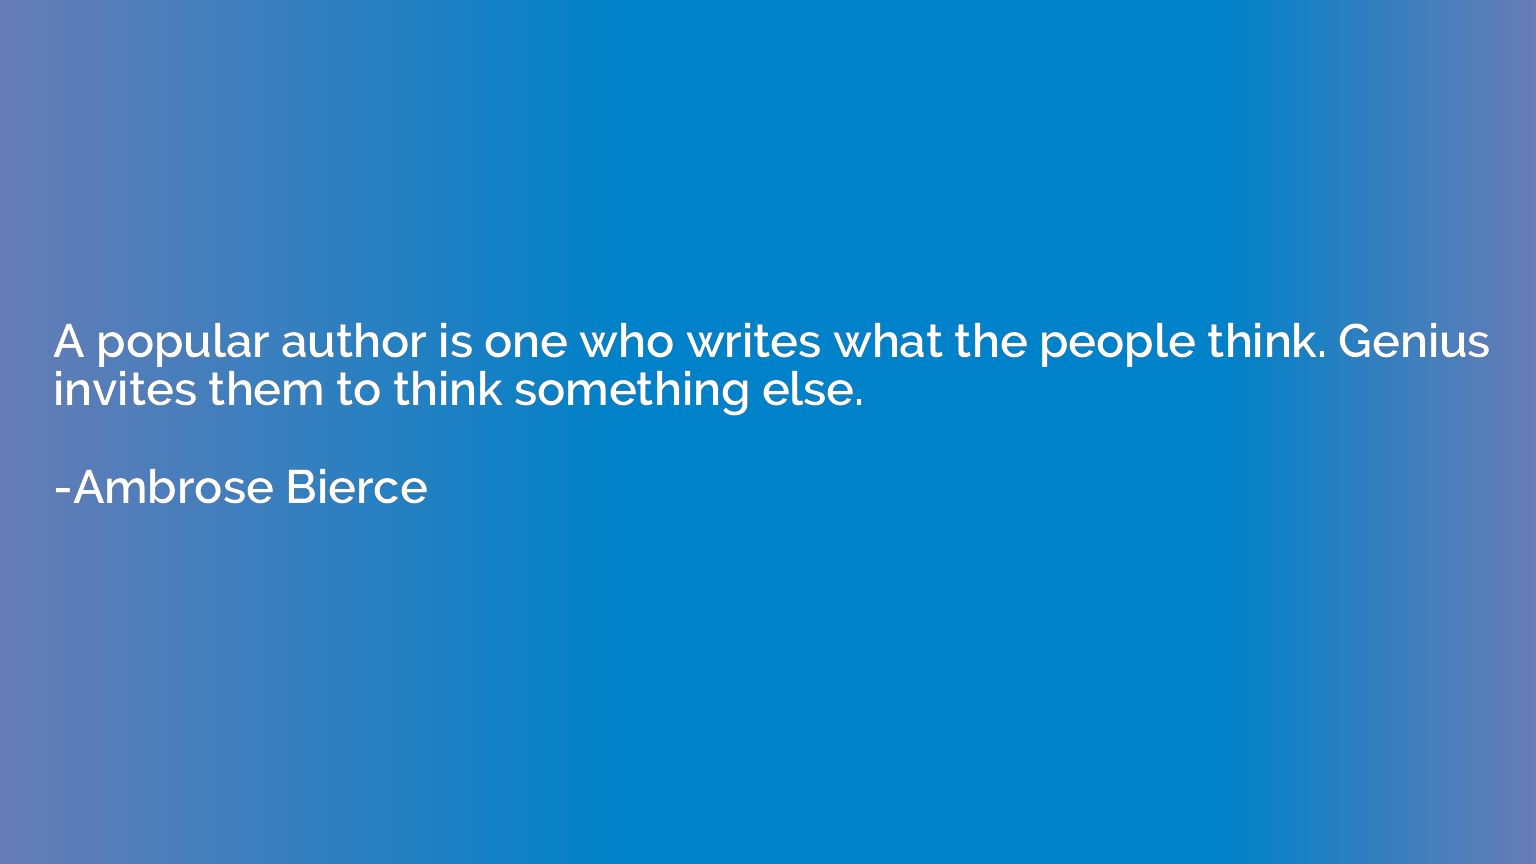 A popular author is one who writes what the people think. Ge